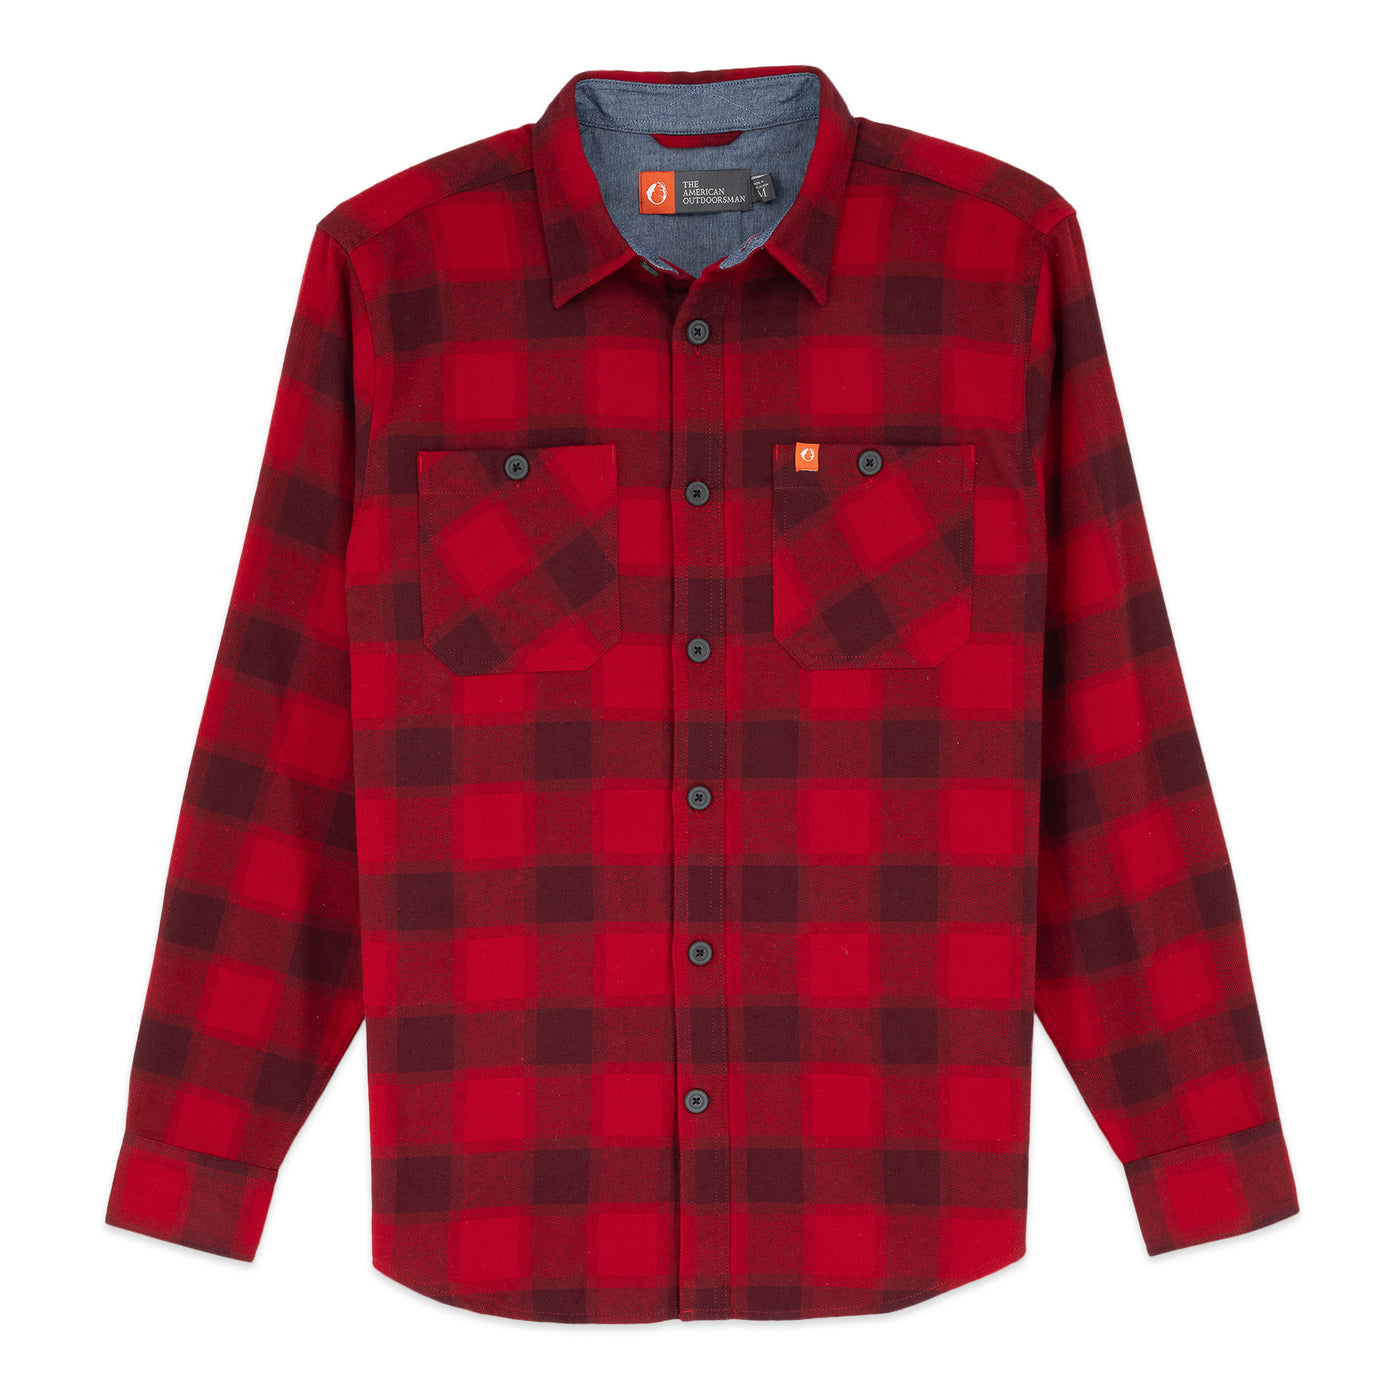 The American Outdoorsman Men's Long Sleeve Midweight Plaid Flannel Button Down Shirt (Red/Wht/Blue, Medium)